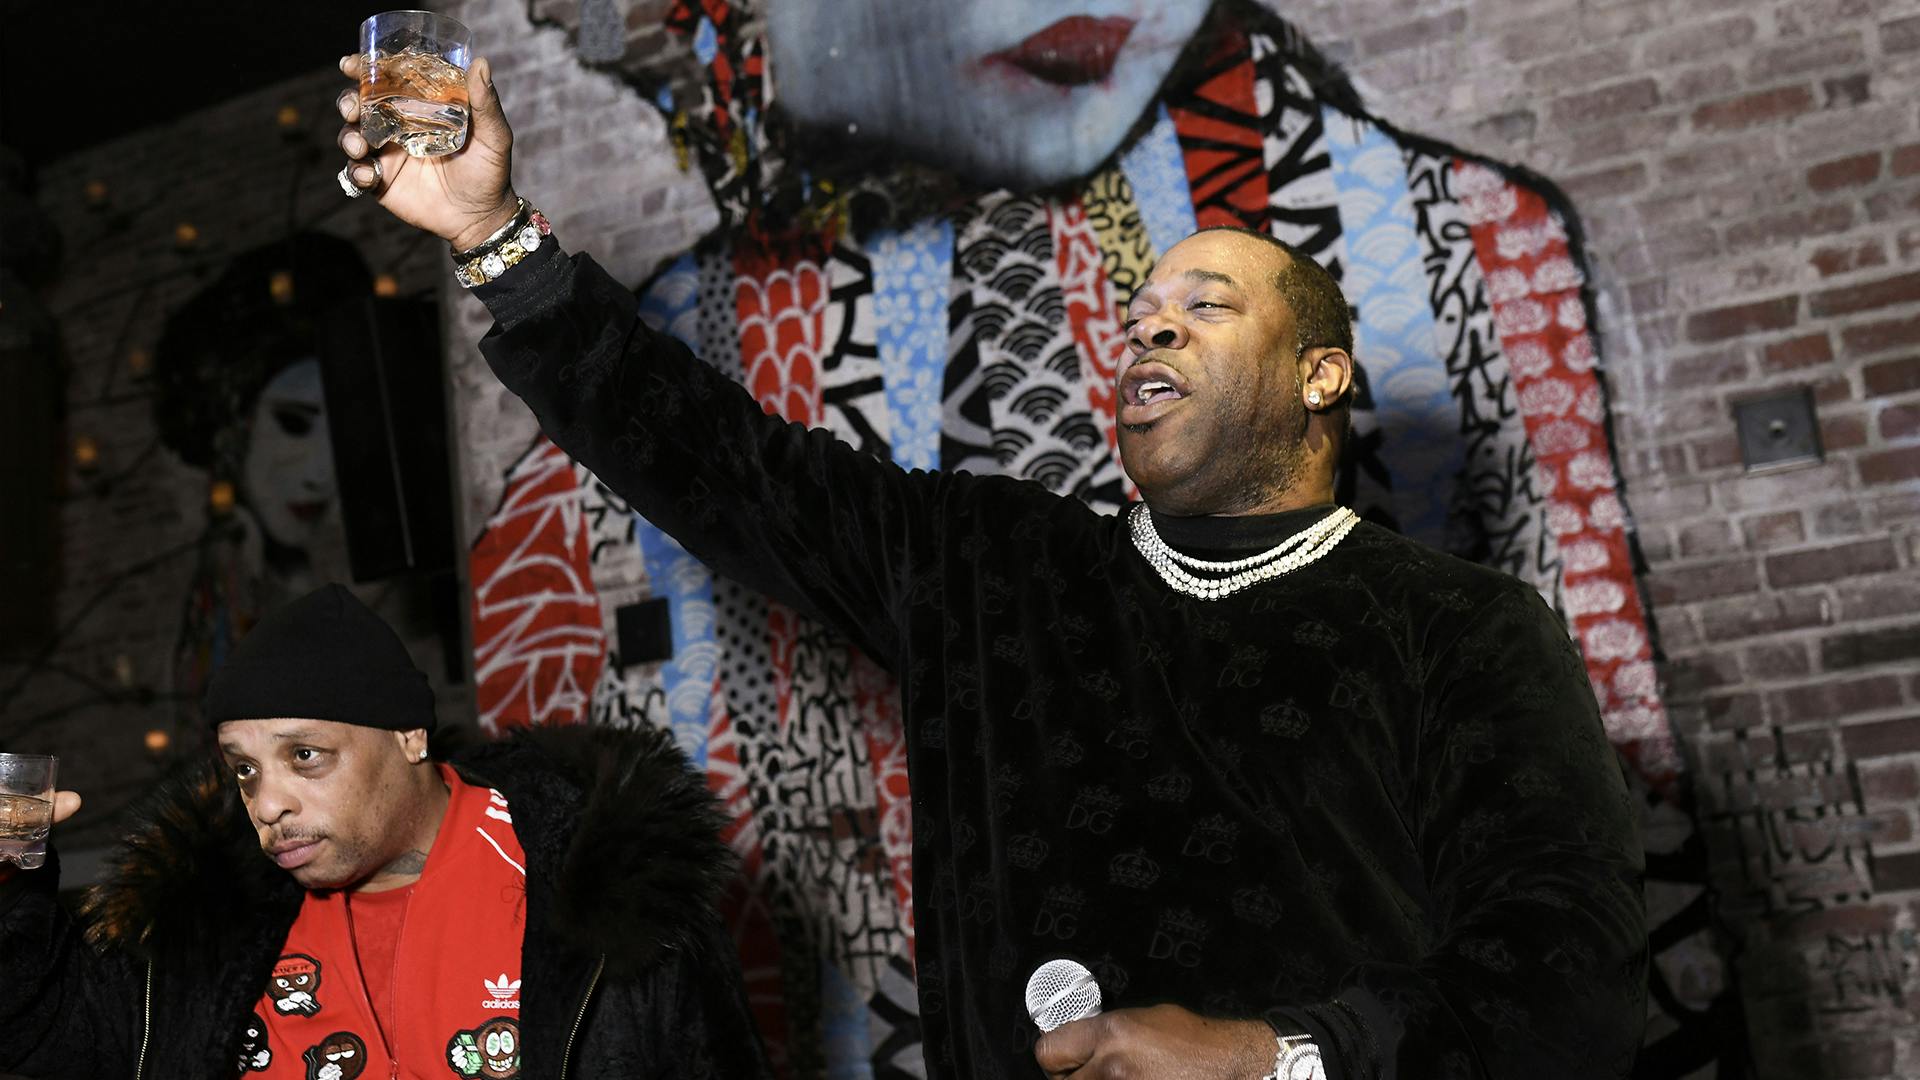 Spliff Star and Busta Rhymes Perform at Teaching Matters Celebrates A Night Out At TAO Downtown To Benefit Early Reading Featuring Busta Rhymes at TAO Downtown on February 20, 2020 in New York City. 
Photo: Jared Siskin/Patrick McMullan via Getty Images